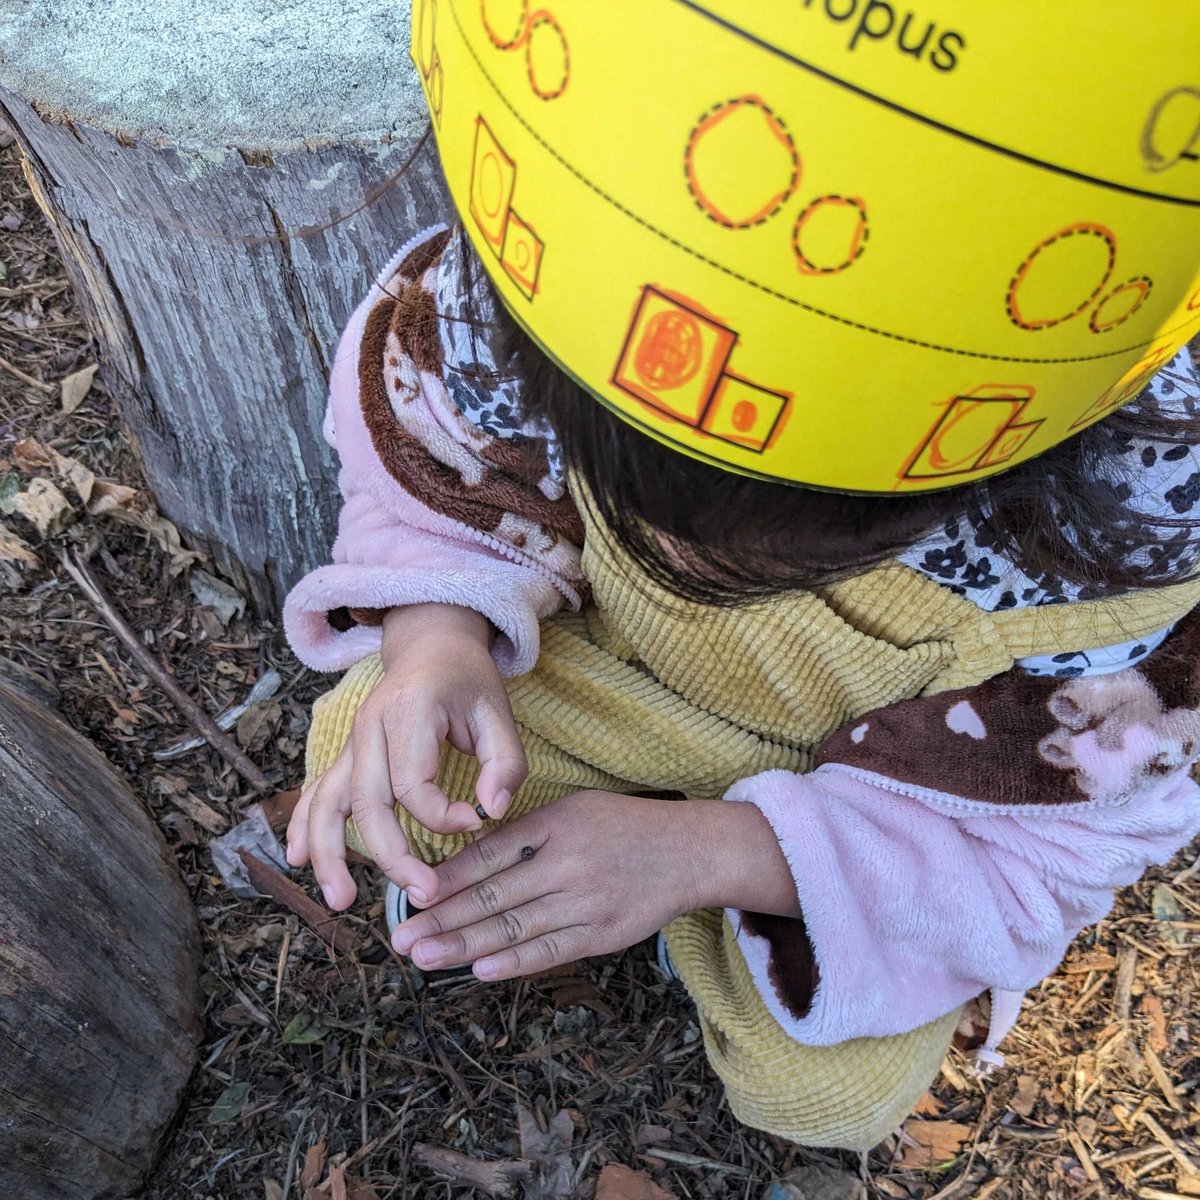 Tiny architects in the making! 🏠 Our preschoolers had a blast on their insect hunt and decided to build a little 'house' for their newfound friends. 🐞

#ExploreEcology #GardenEducation #GardenExplorers #InsectHunt #Preschoolers #SantaBarbara #805